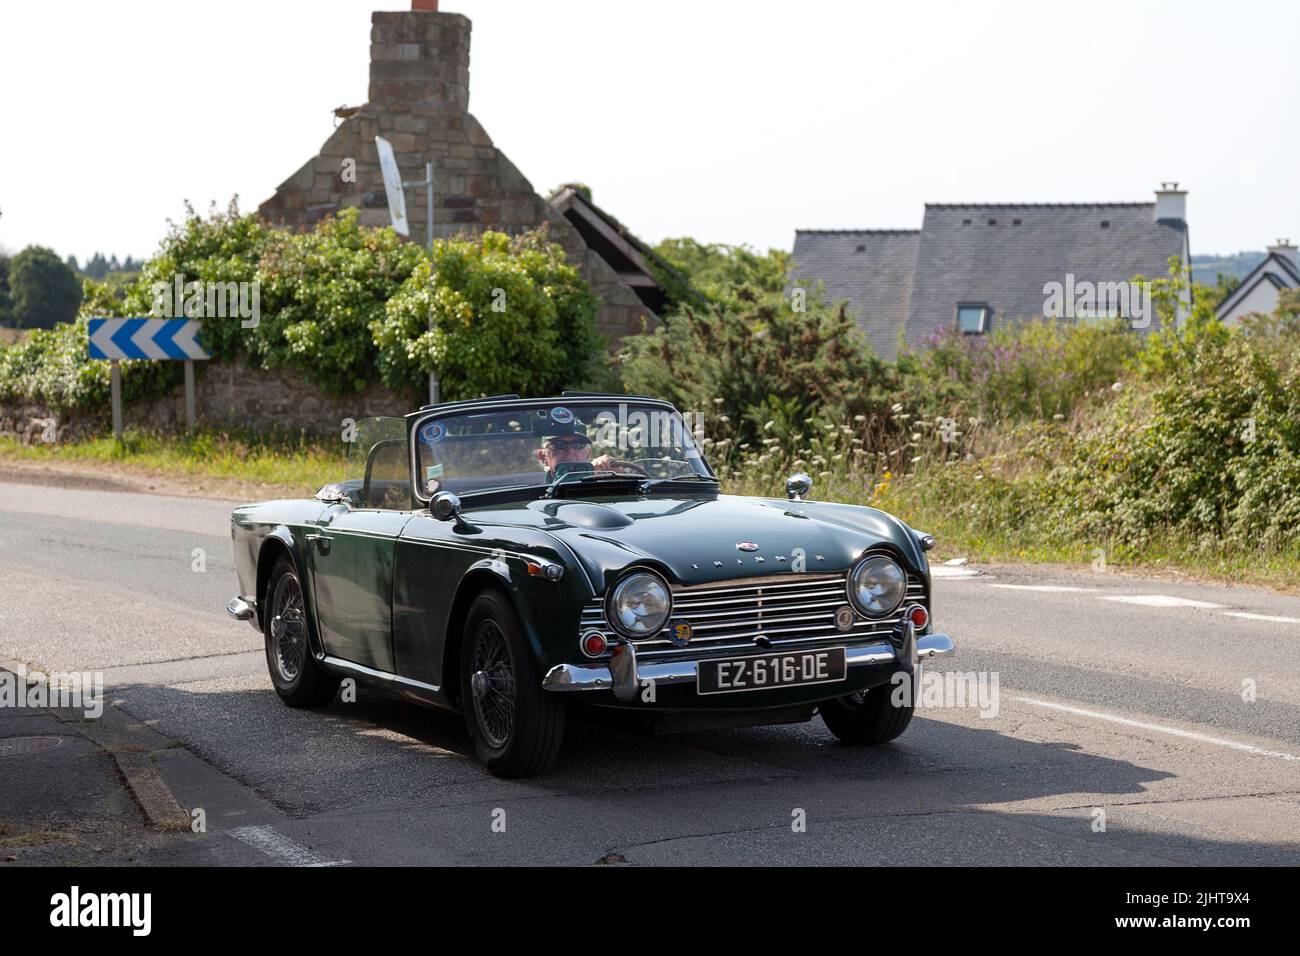 Kerlaz, France - July 17 2022: Retired couple cruising in a green Triumph TR5 sports convertible. Stock Photo